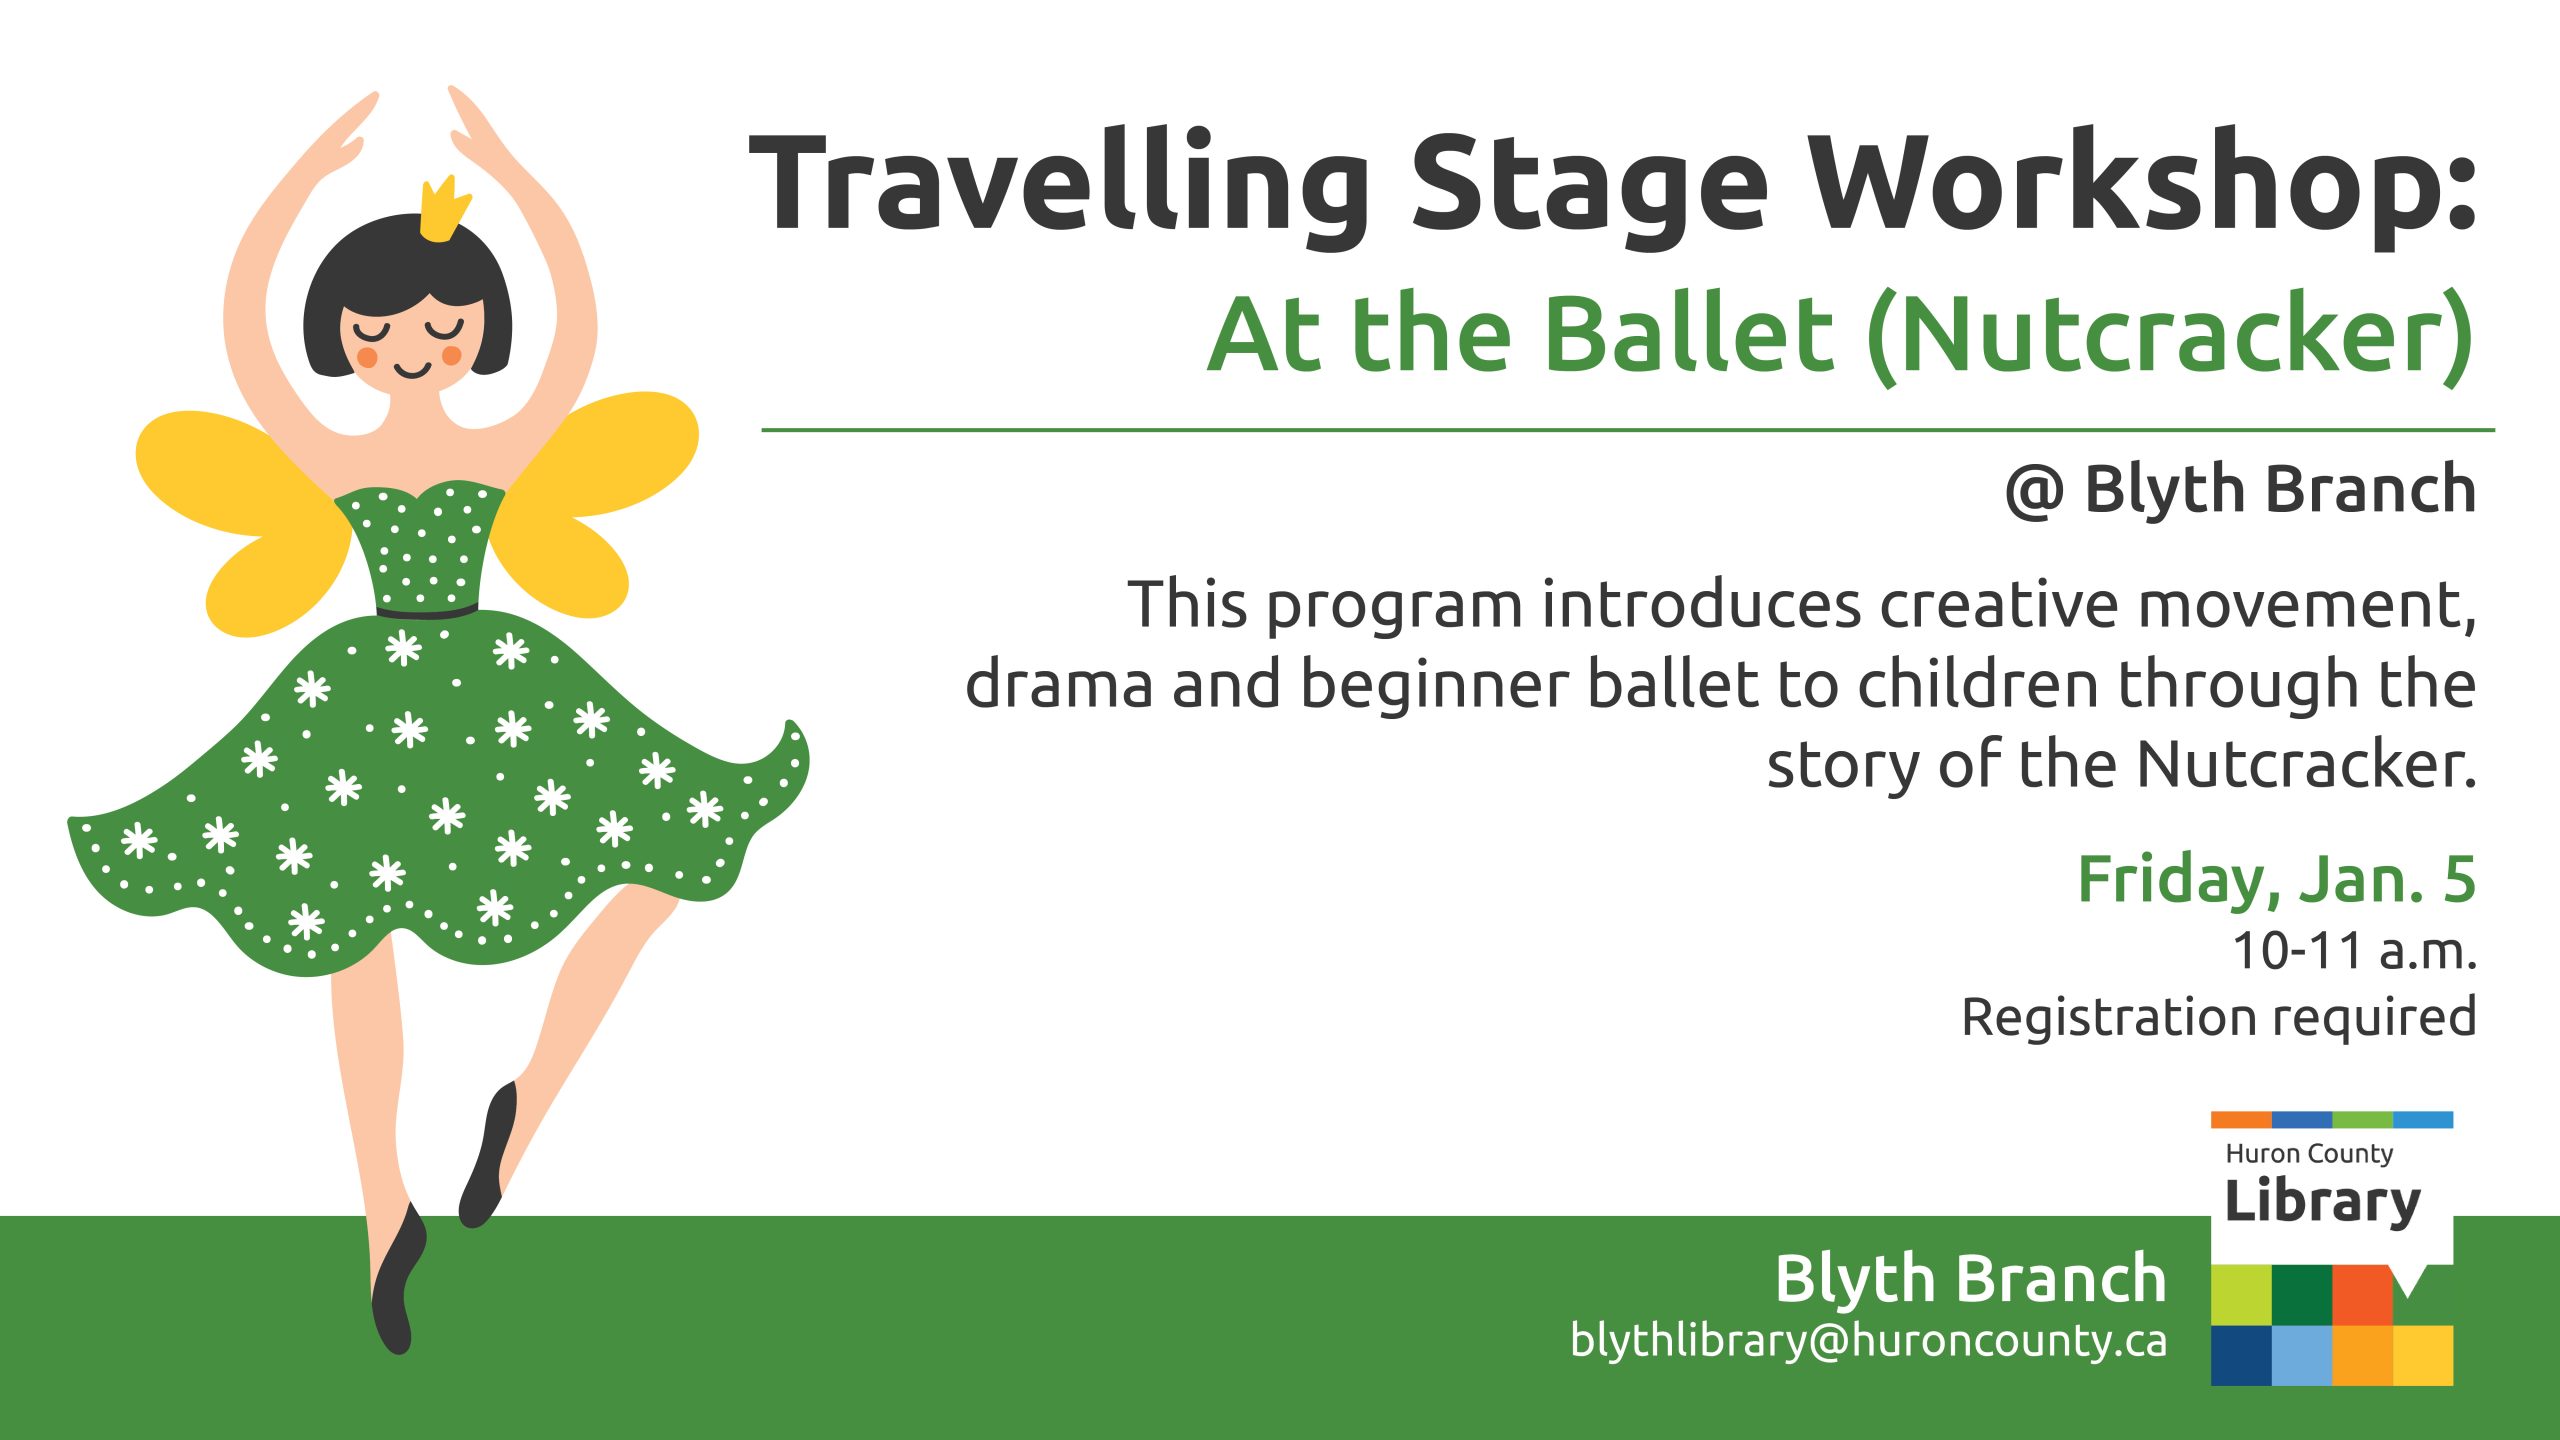 Illustration of a ballerina with text promoting workshop at Blyth Branch